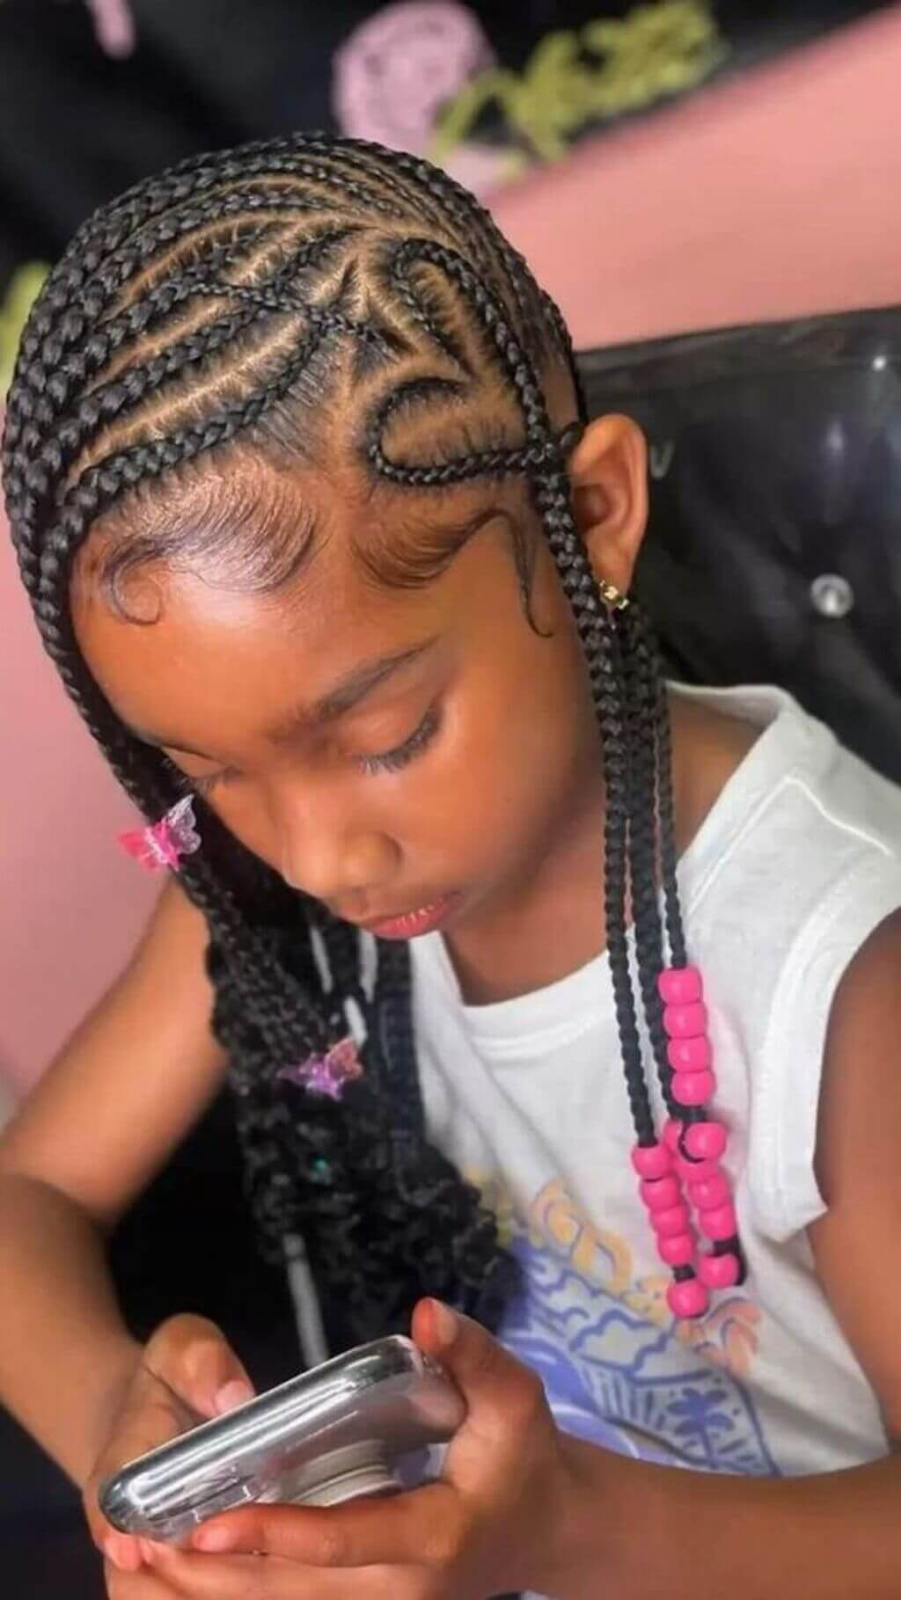 Kiddies braid hairstyle: Full picture  showing a young girl rocking her braids with beads